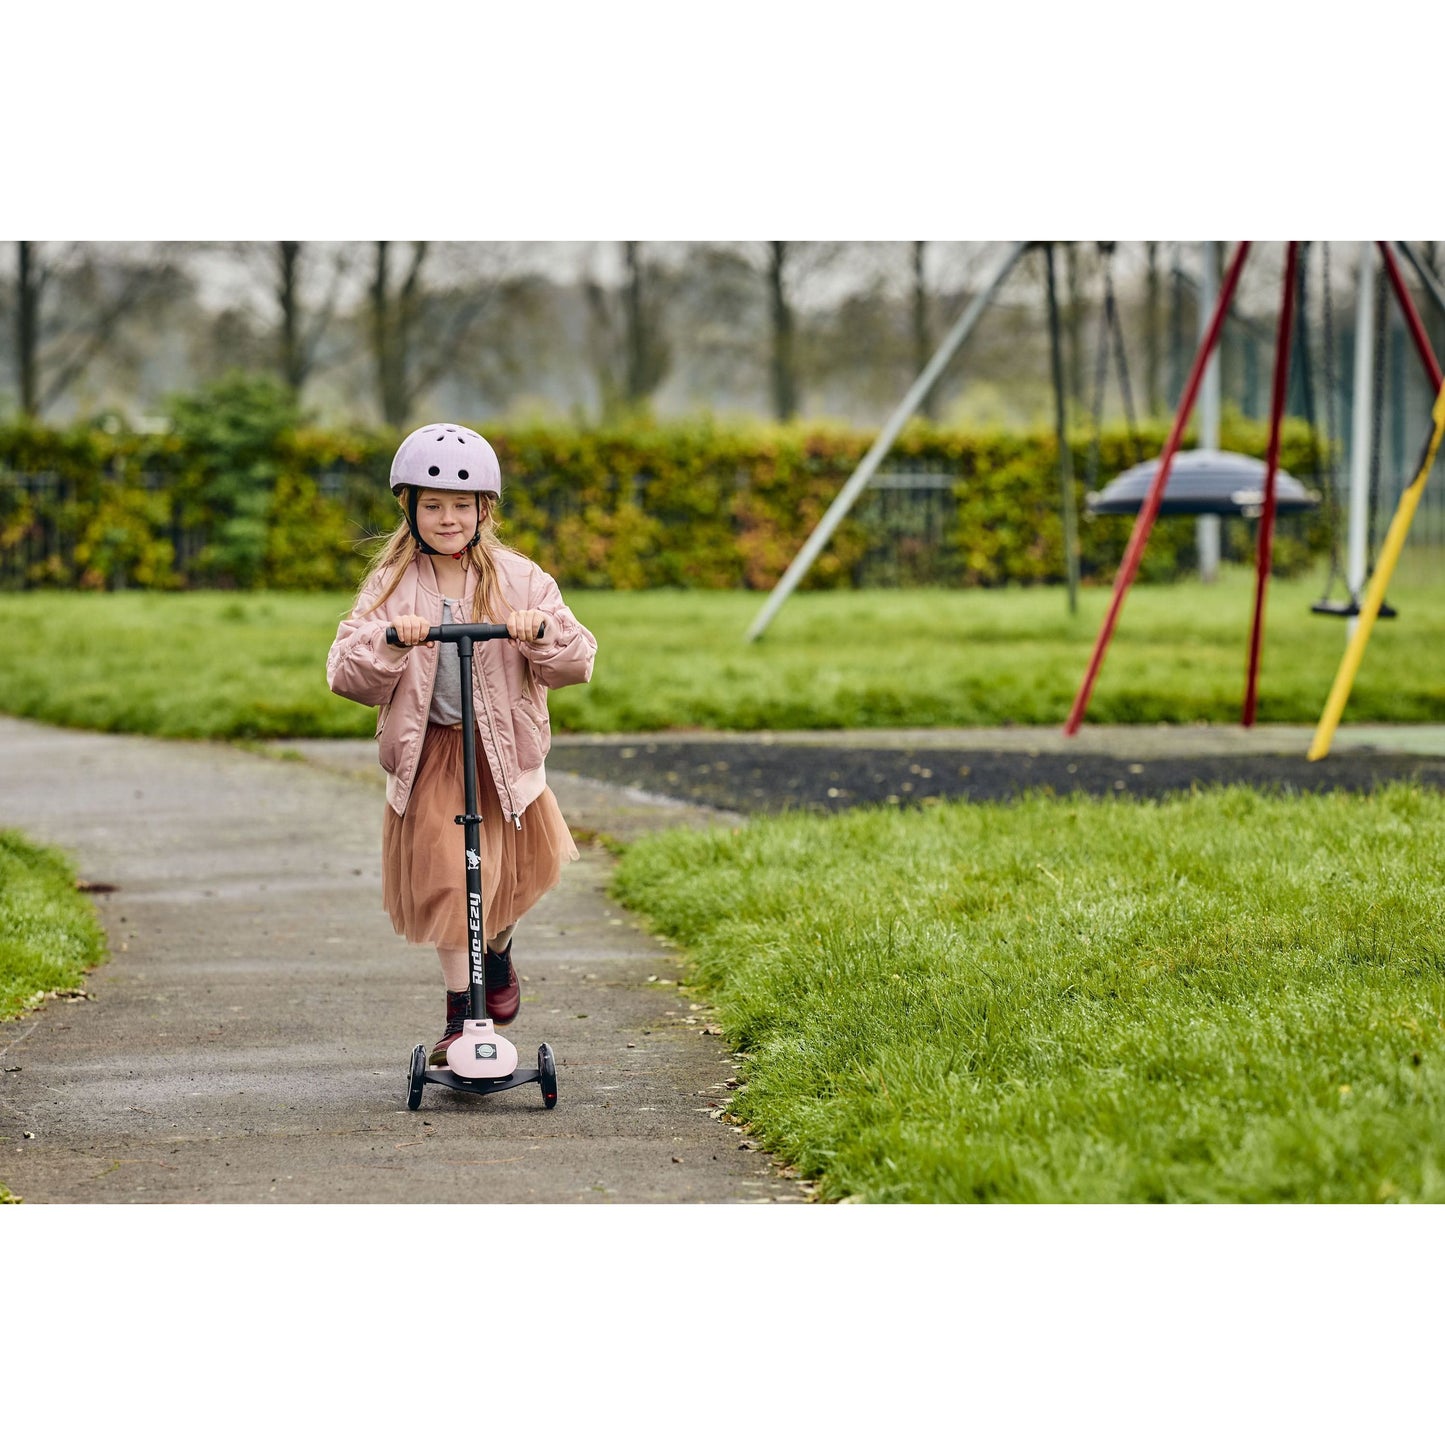 girl riding Ride-Ezy Kick Scooter - Blossom near swings in park